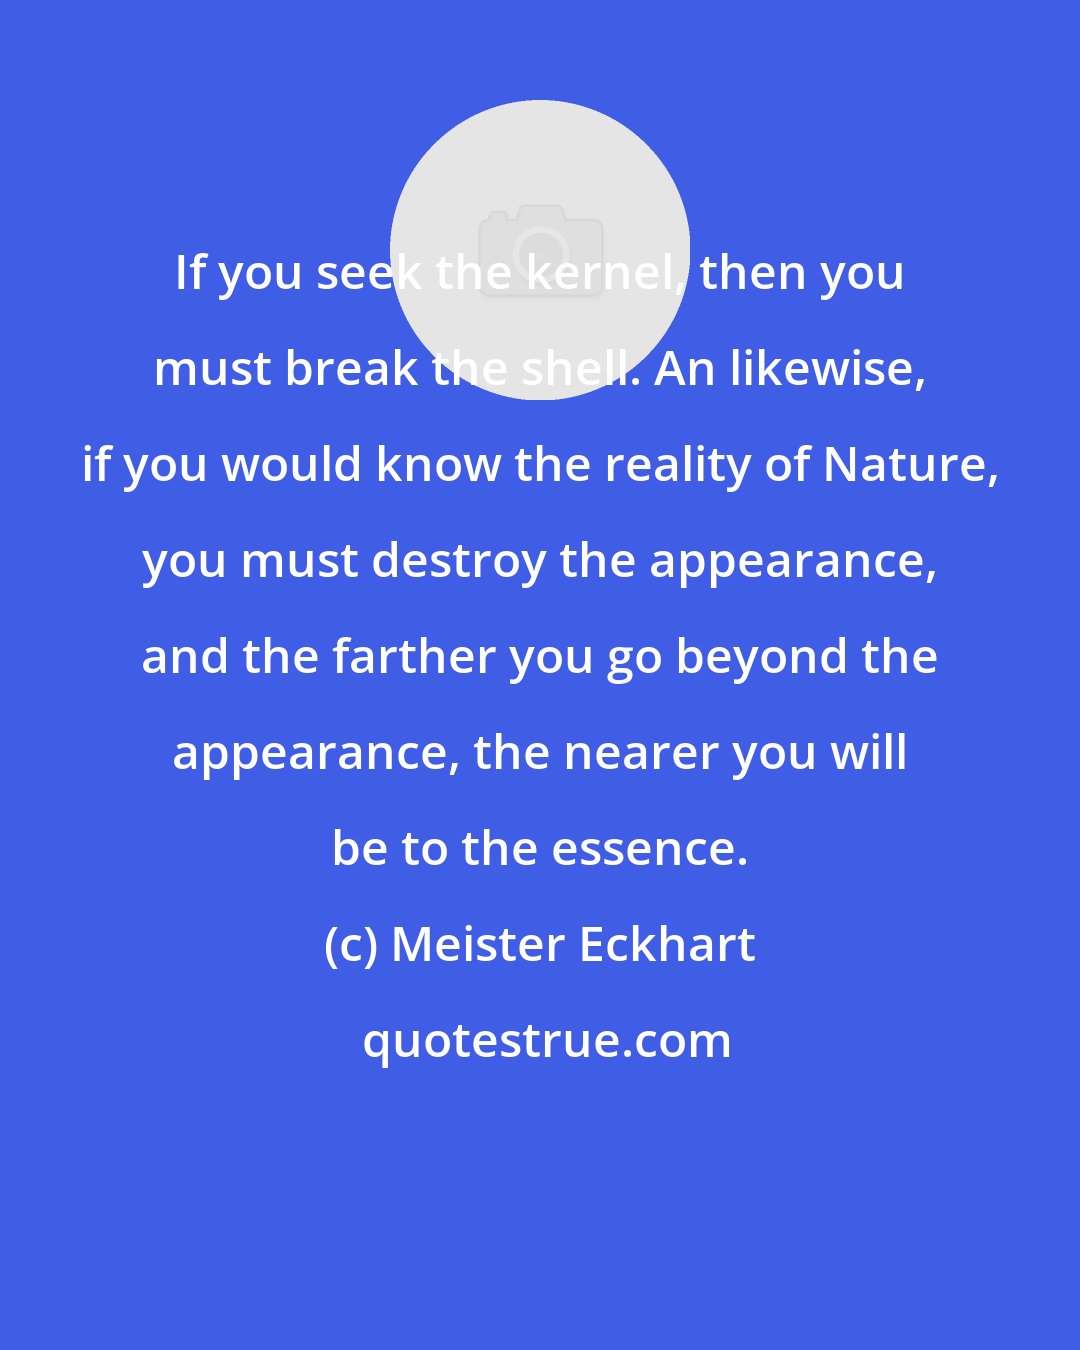 Meister Eckhart: If you seek the kernel, then you must break the shell. An likewise, if you would know the reality of Nature, you must destroy the appearance, and the farther you go beyond the appearance, the nearer you will be to the essence.